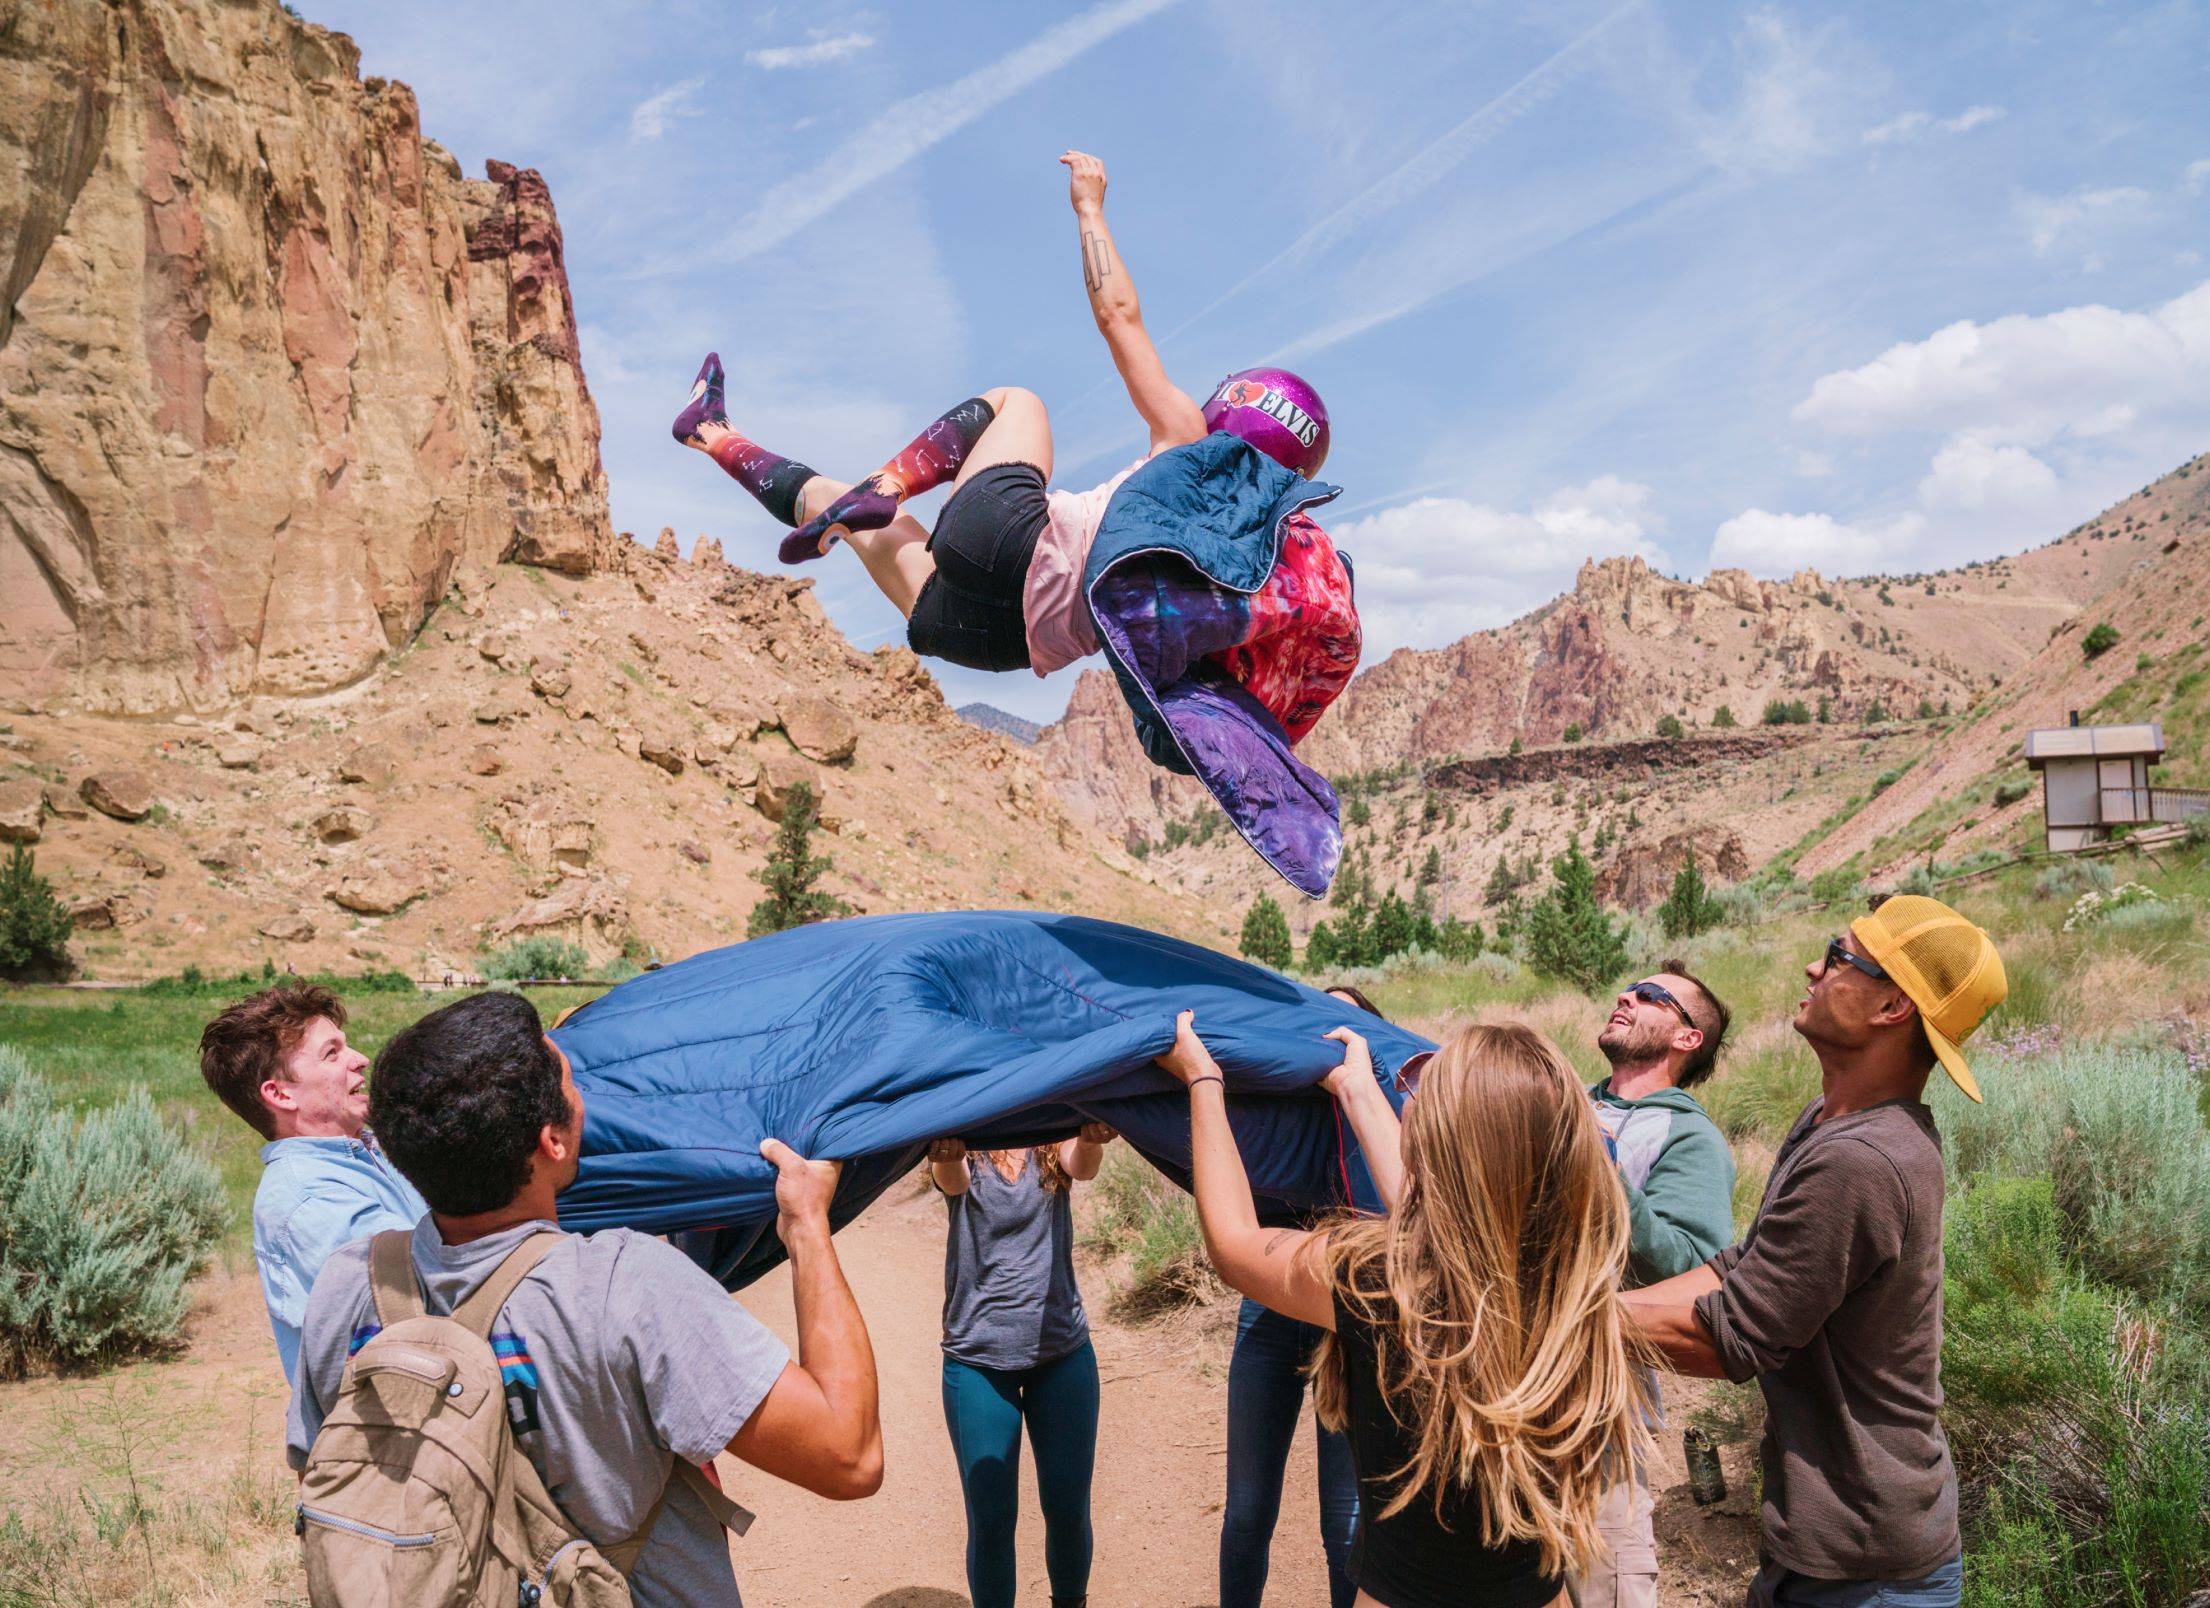 A person suspended mid-air, propelled by laughter and the warmth of friendship, as they're playfully tossed by a group using a cozy Rumpl blanket.